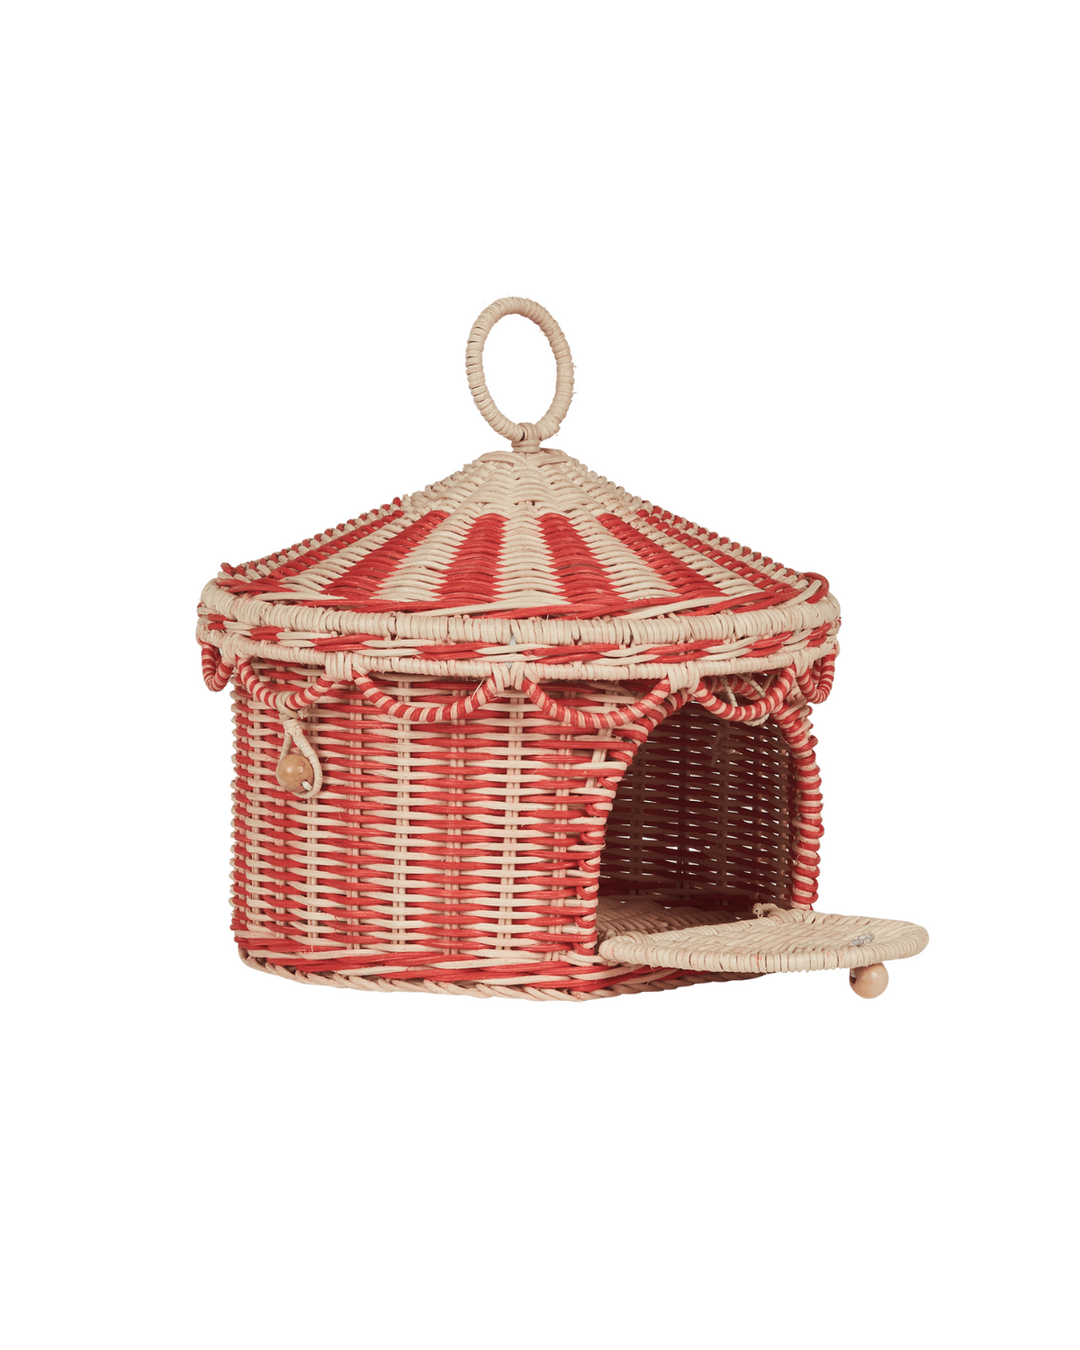 Handmade Red and Straw Home Decor Basket - Circus Tent